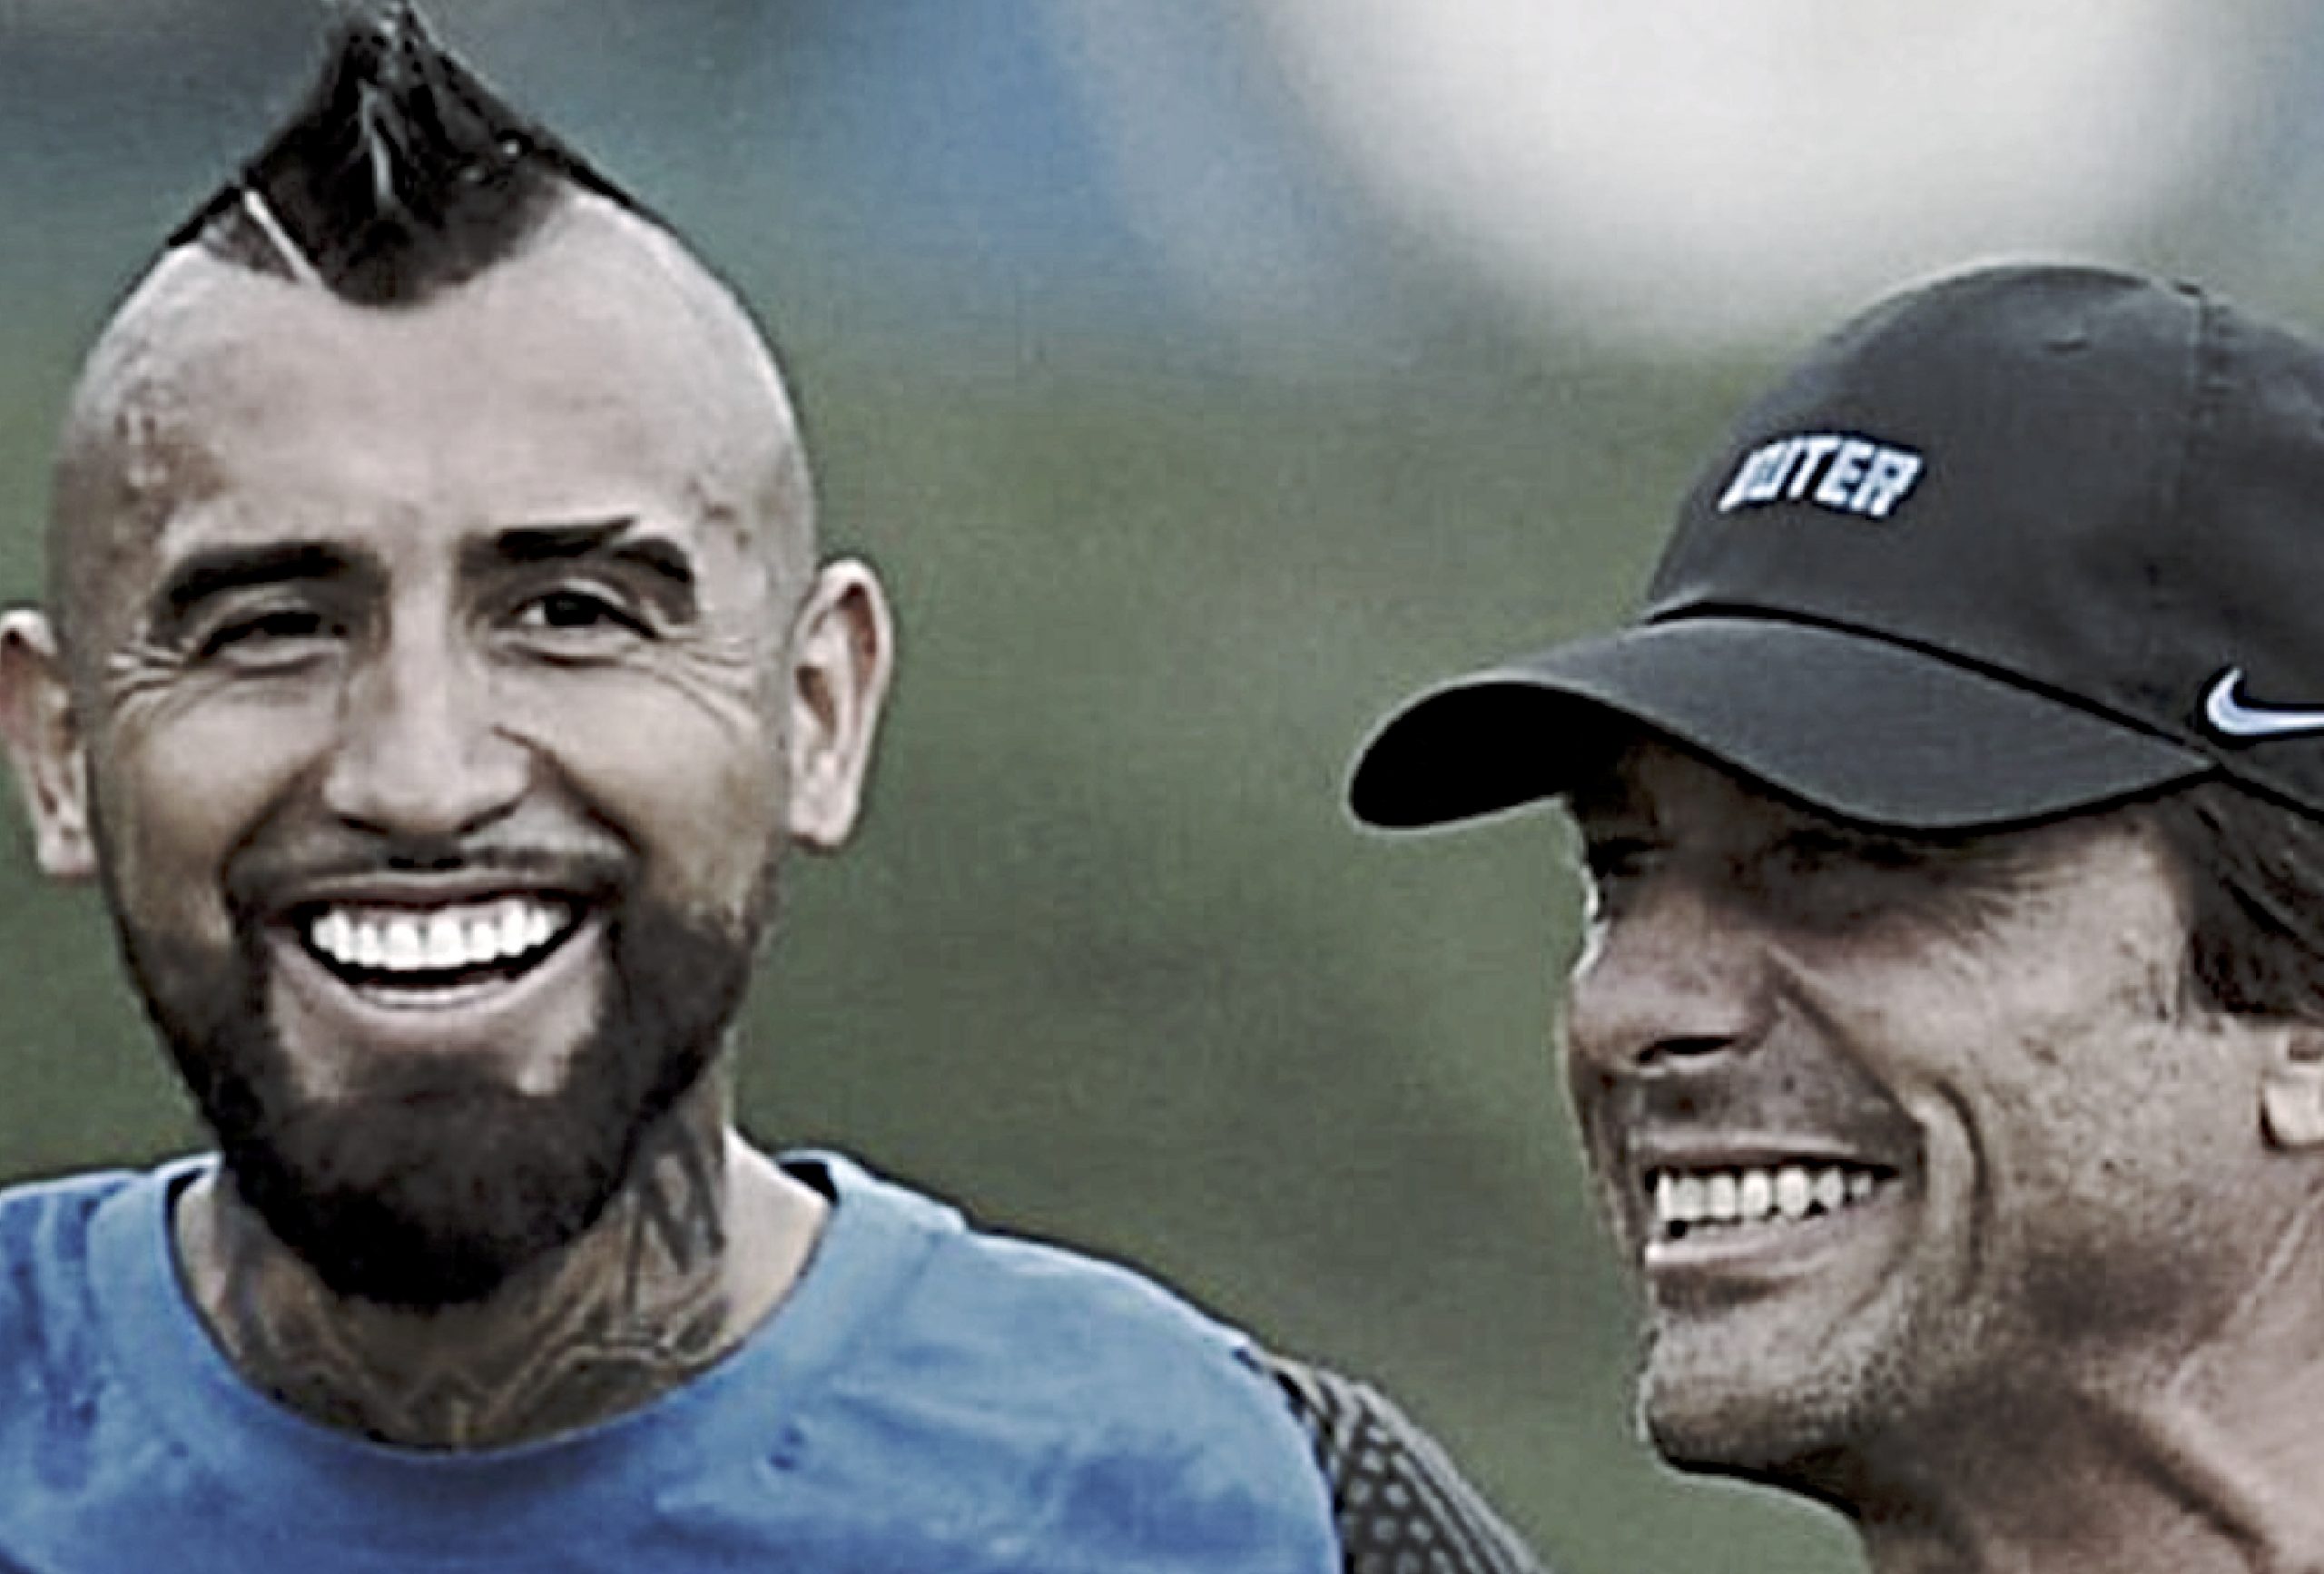 Antonio Conte going against the grain as Arturo Vidal joins the army of 30+ players at Inter Milan